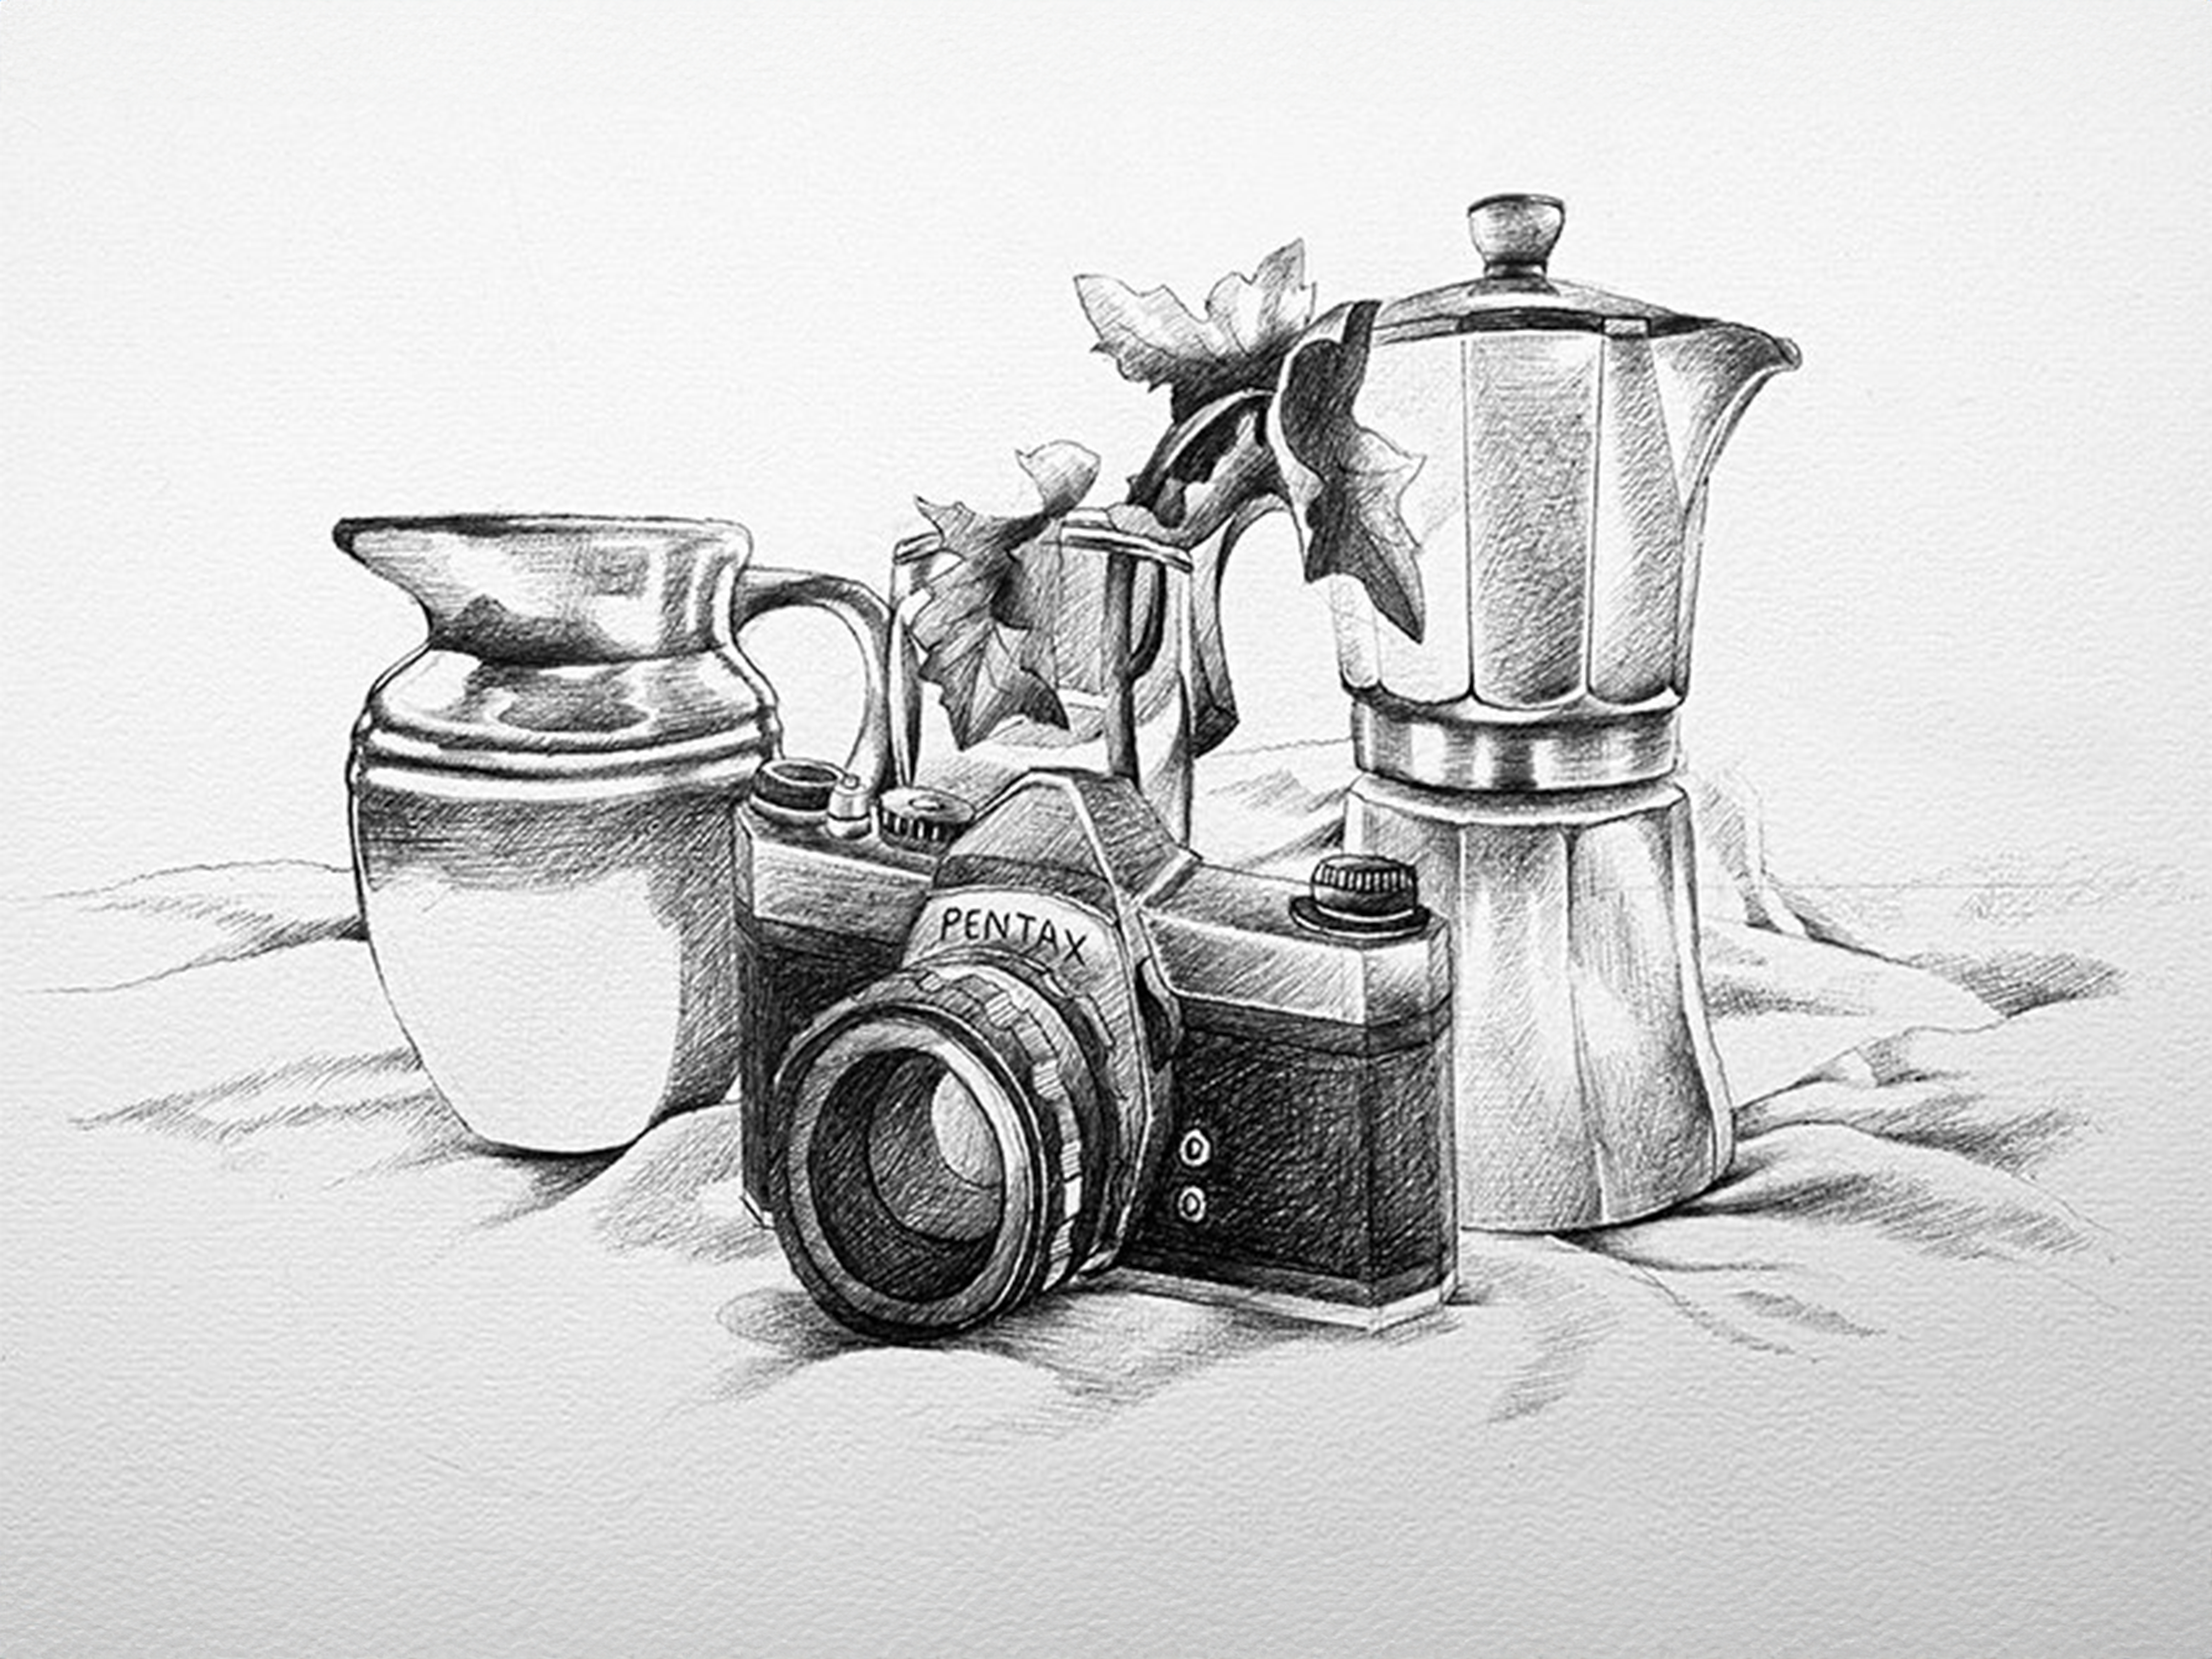 How to draw a Still Life